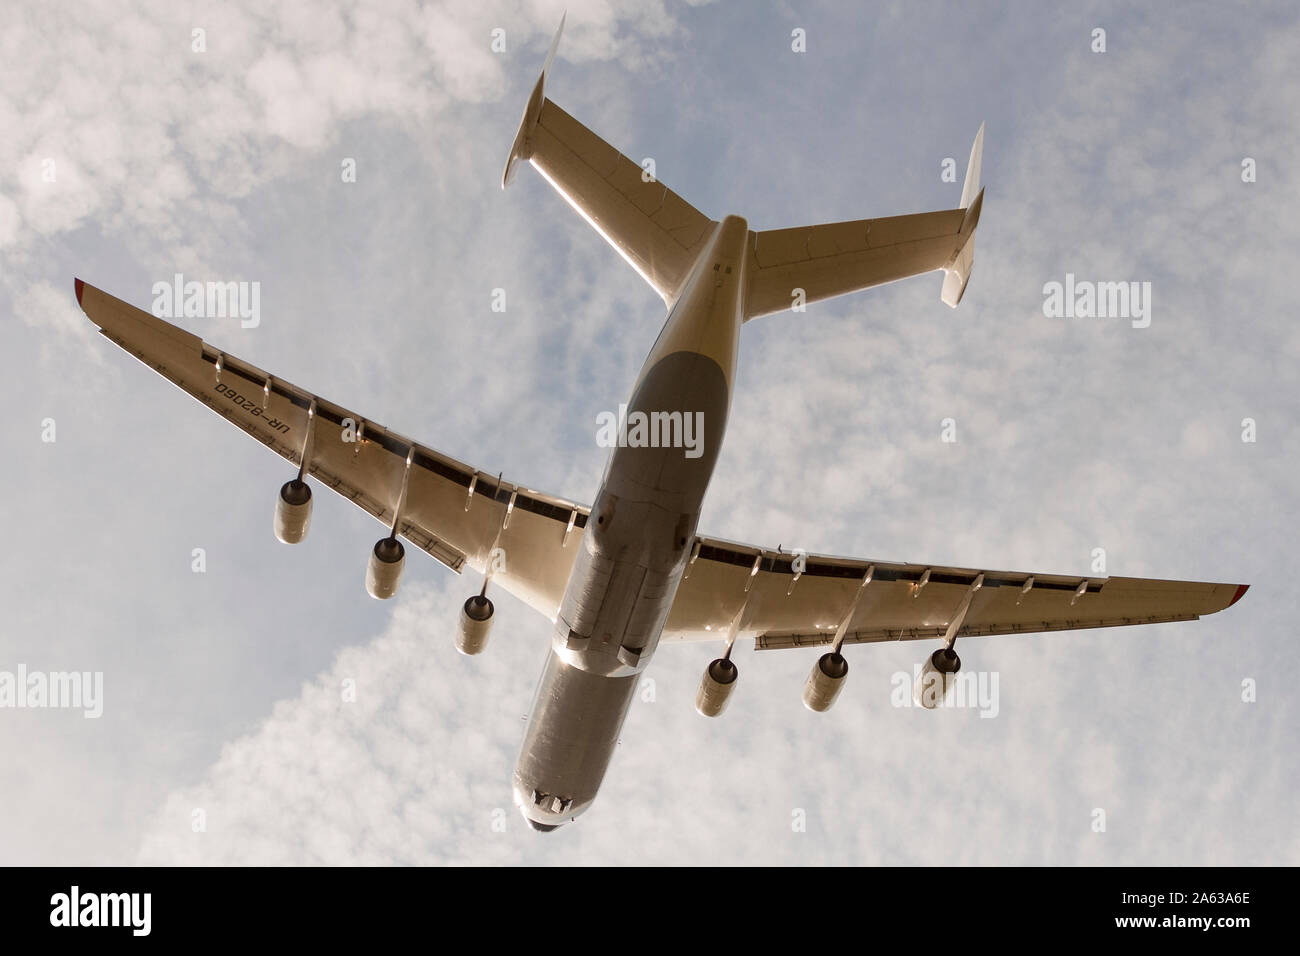 UR-82060 Biggest plane on planet, taking-off from Doncaster Airport, UK Stock Photo